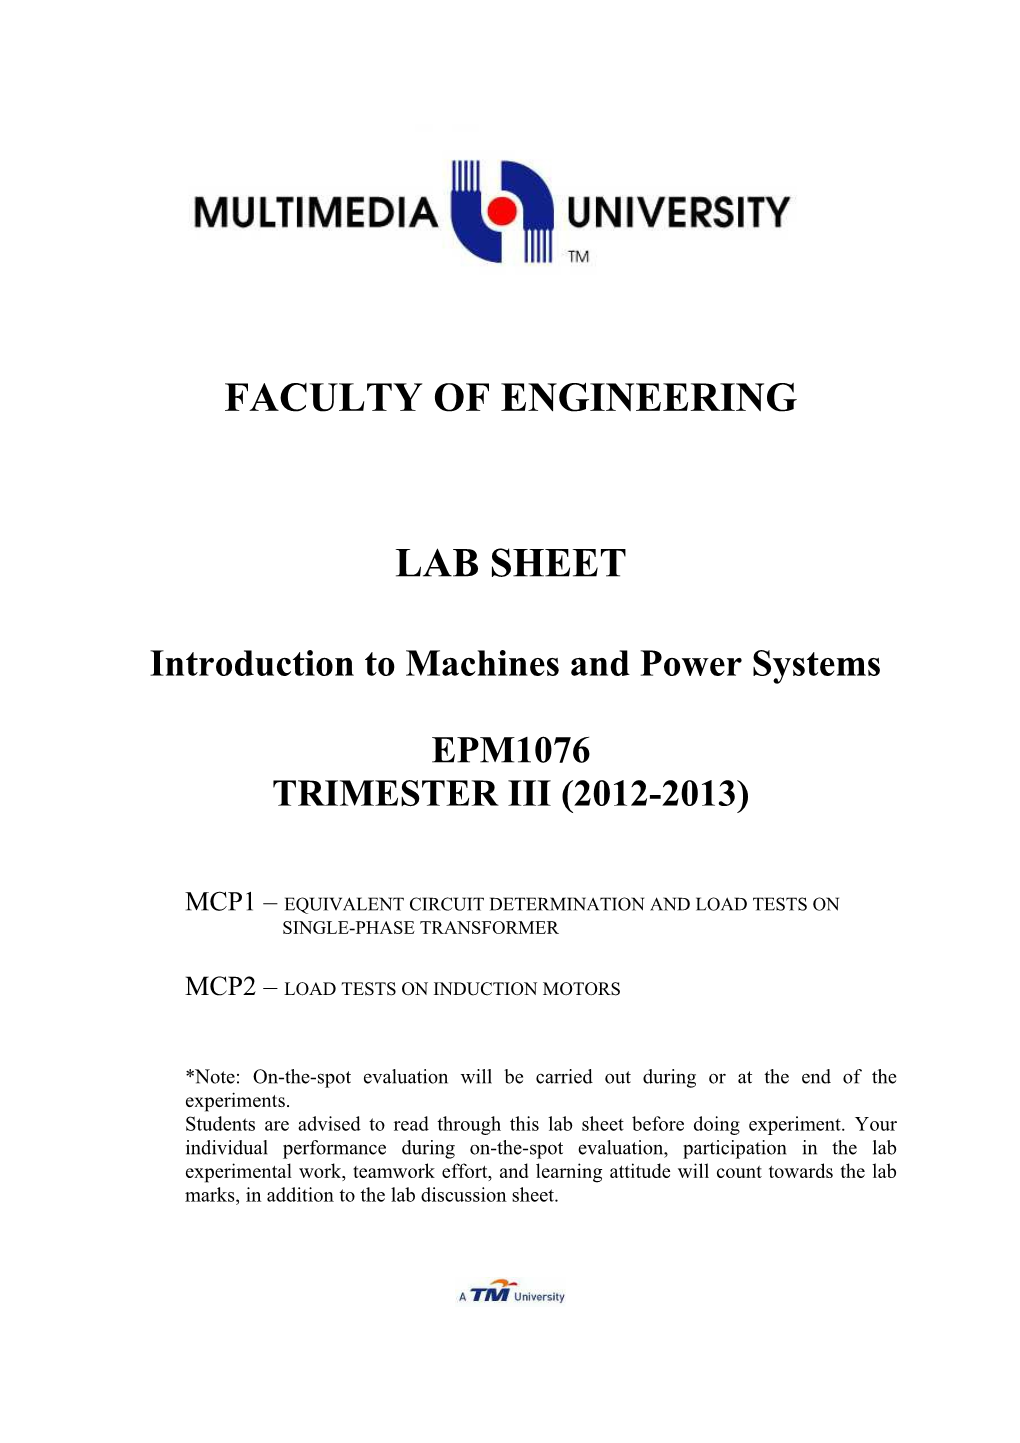 Introduction to Machines and Power Systems